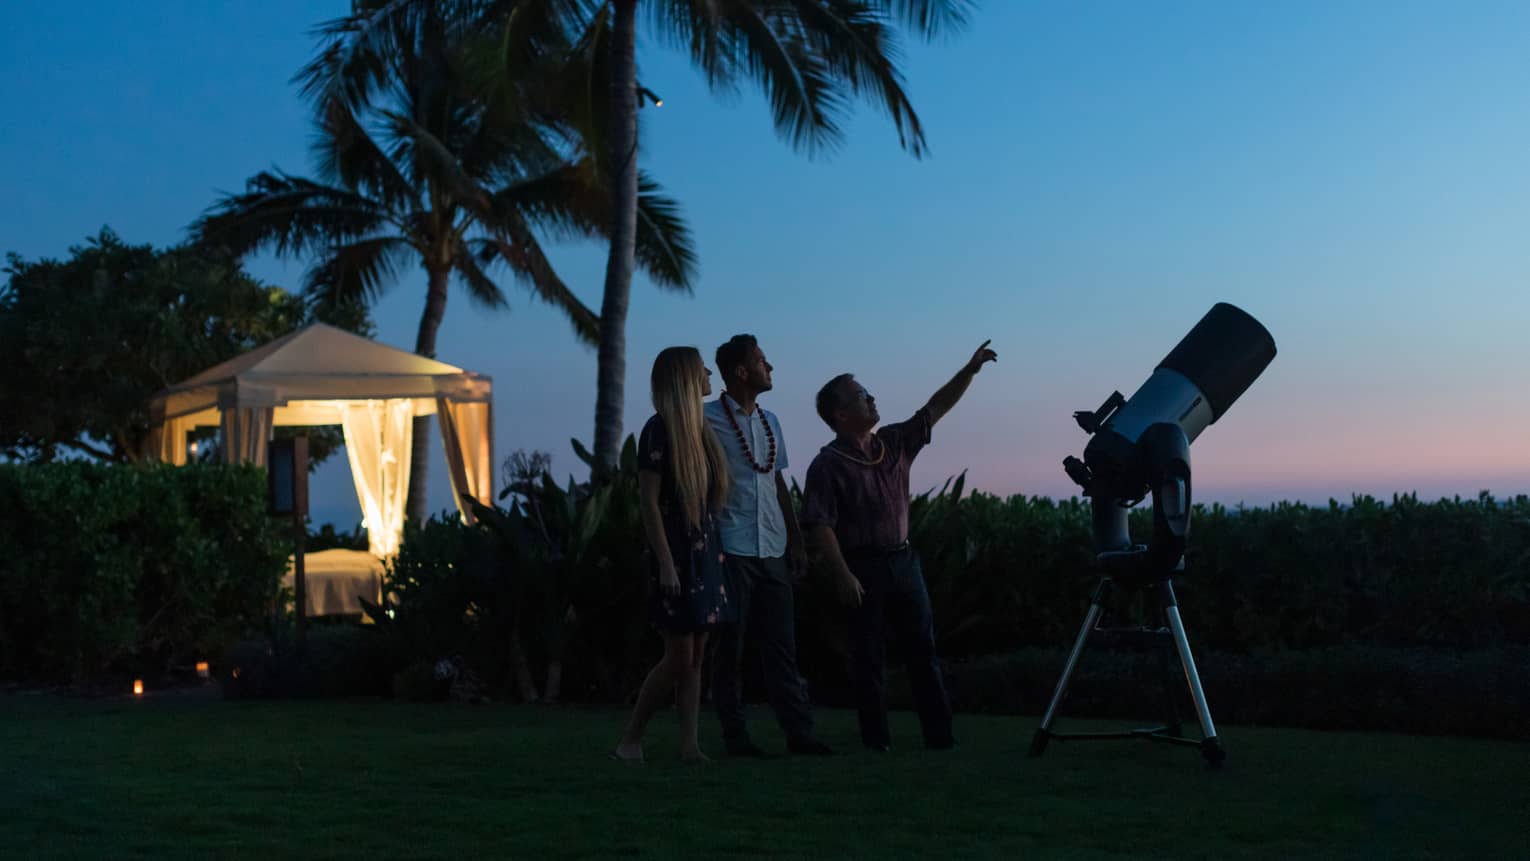 Silhouetted amid palm trees and a telescope, a guide points at the sky as two guests look up, a lit-up gazebo behind them.